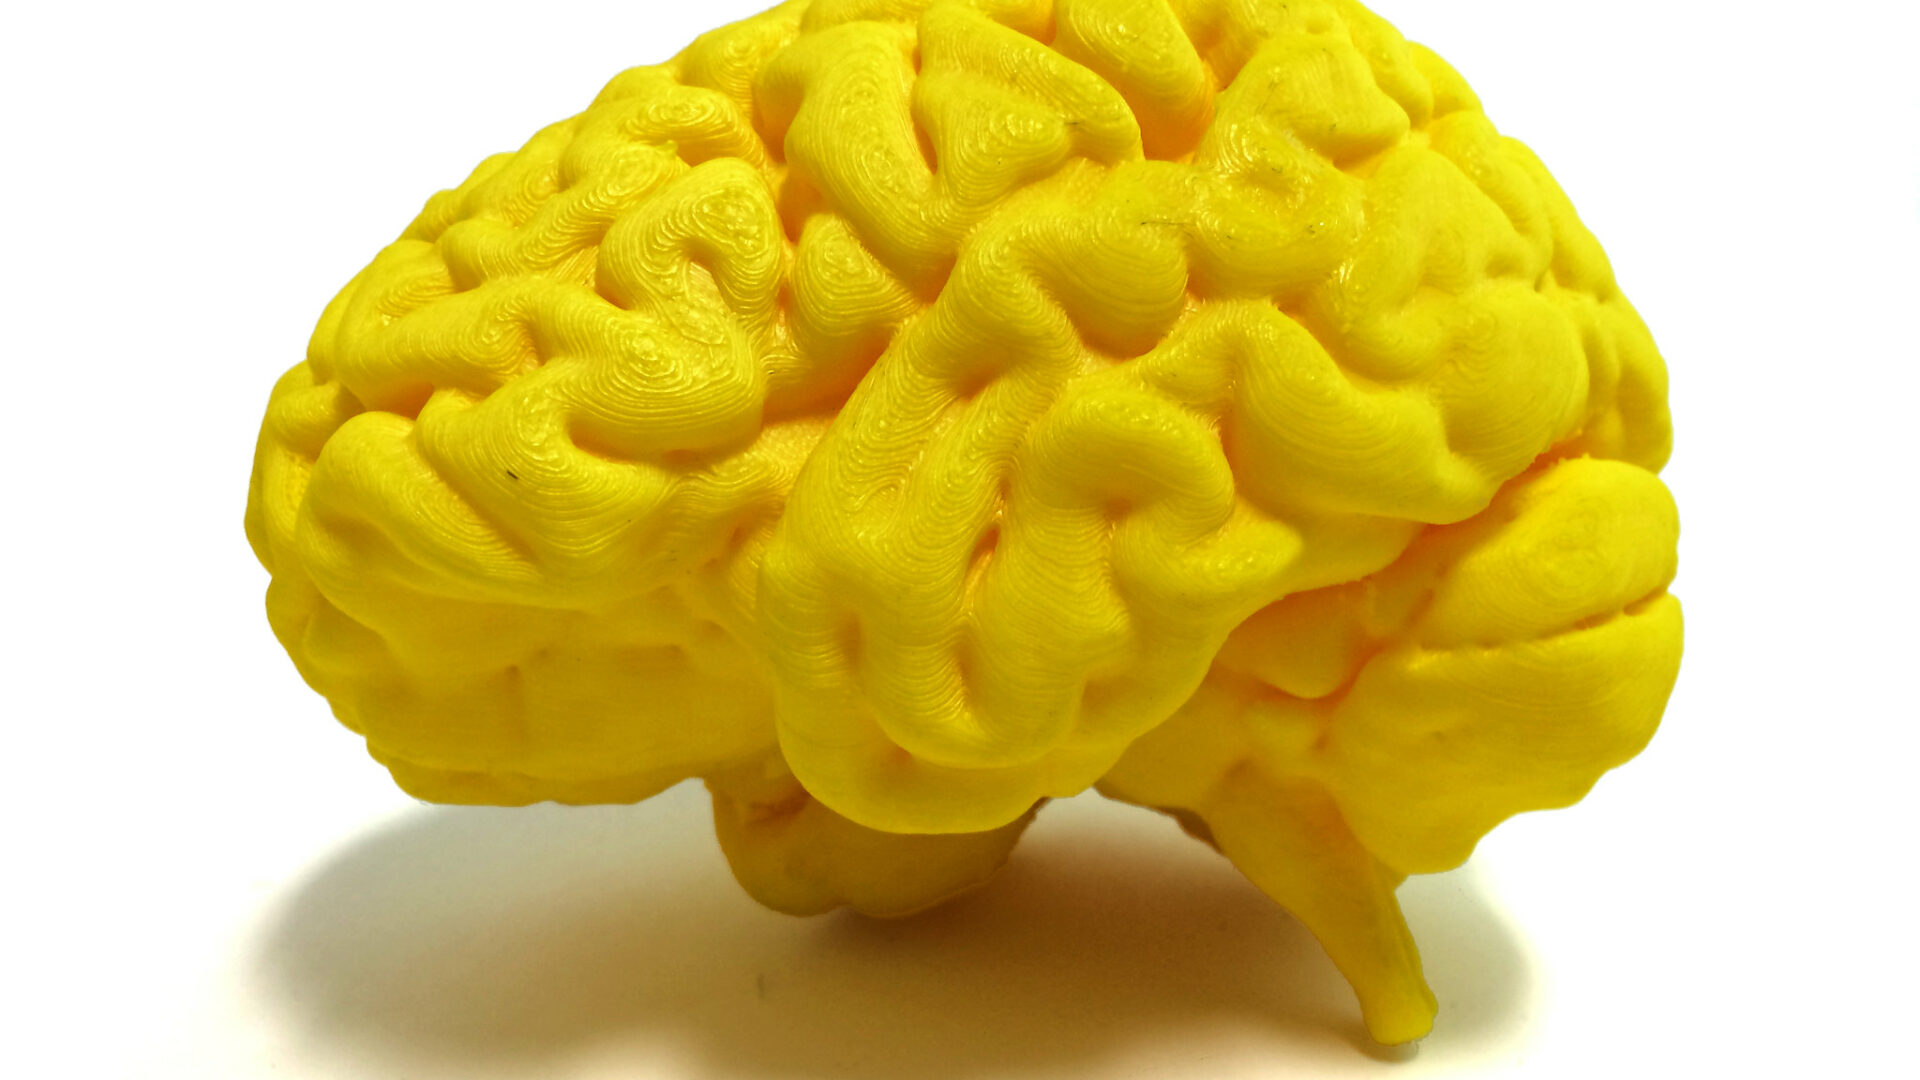 Photo of a yellow 3D model of a human brain.